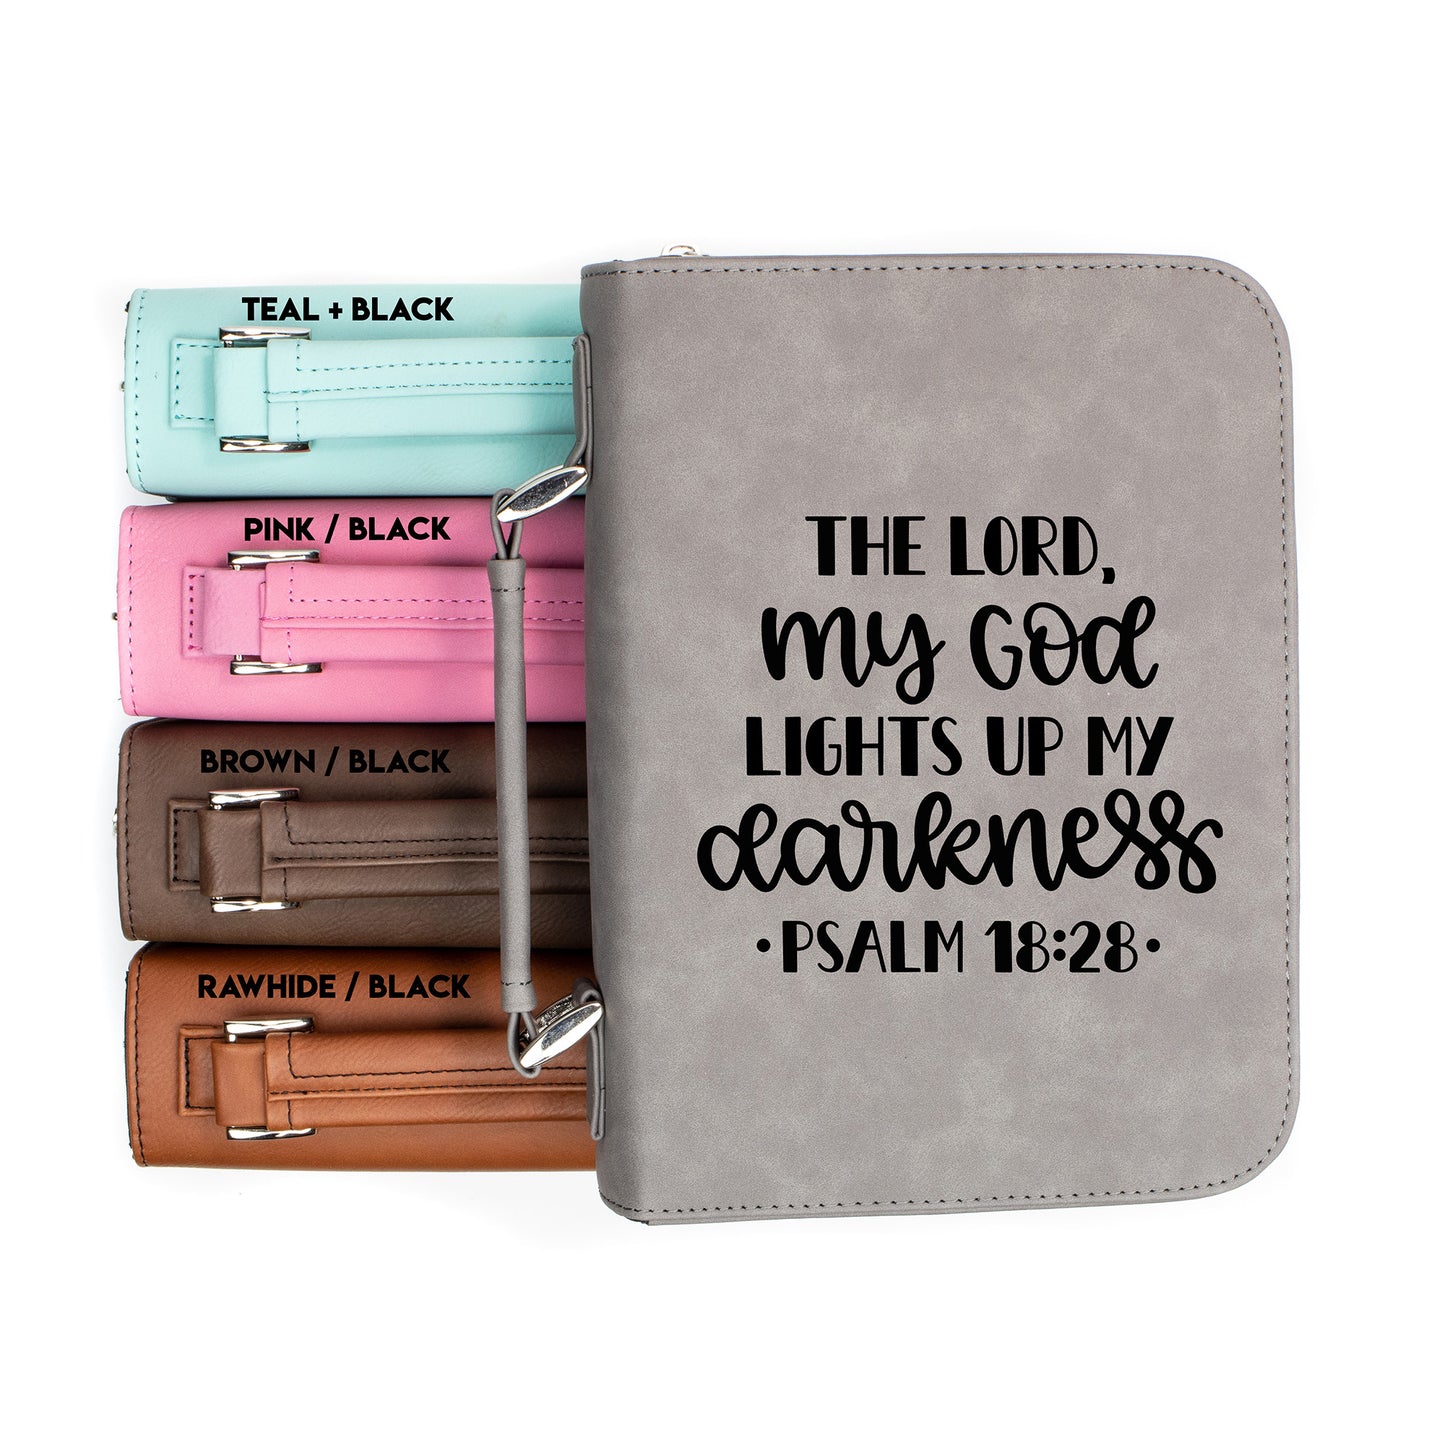 The Lord My God Lights Up My Darkness - Psalm 18:28 - Bible Book Cover